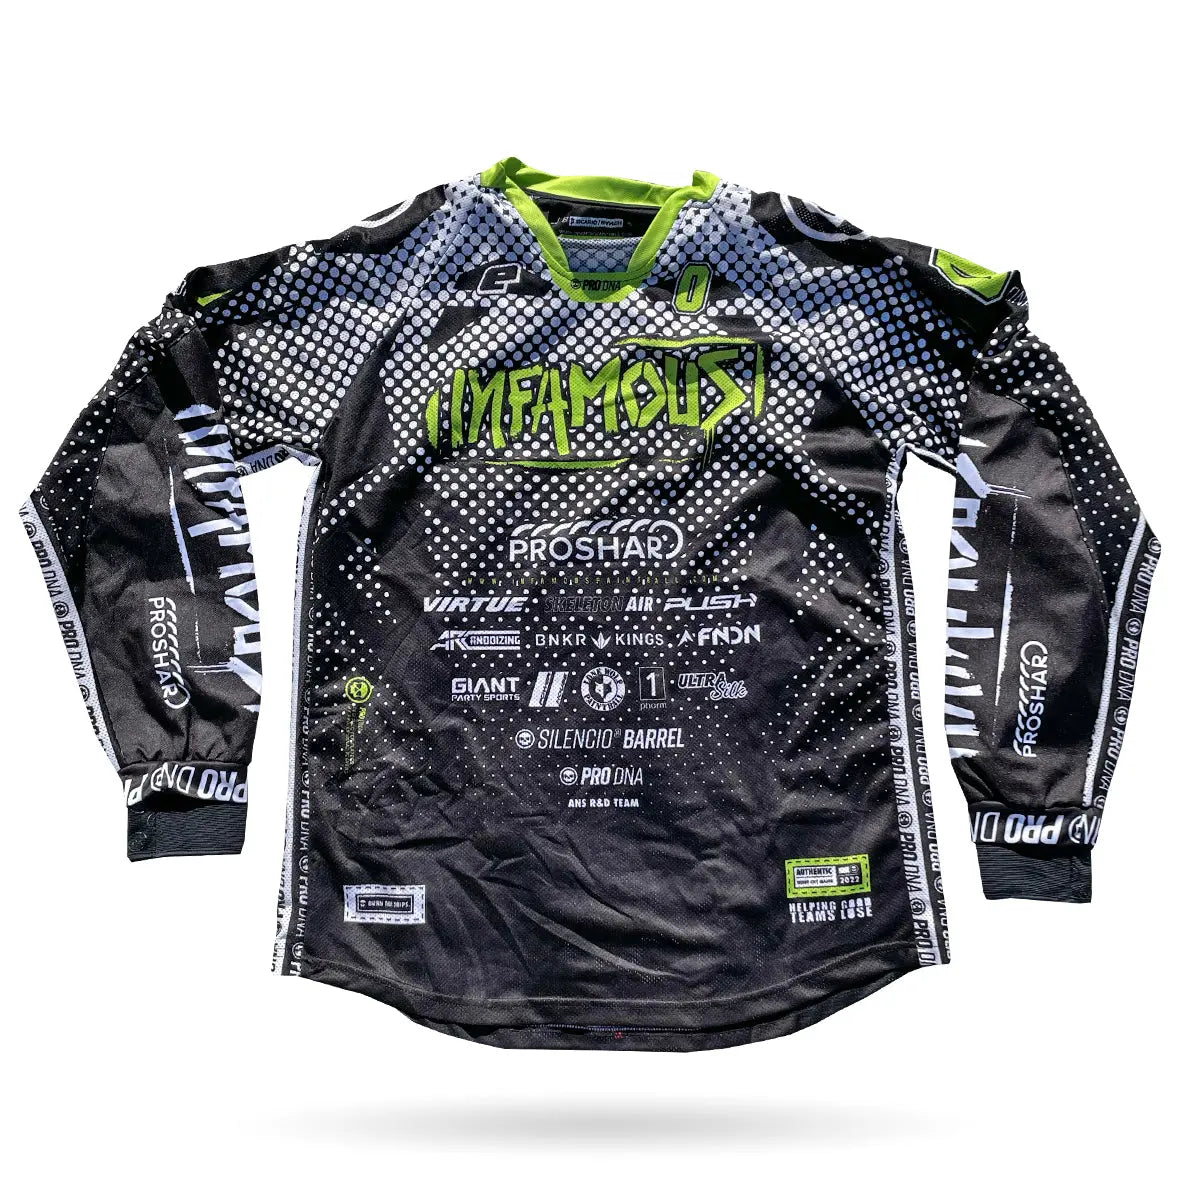 JT Paintball - Which team had the most 🔥 jersey at @nxlpaintball